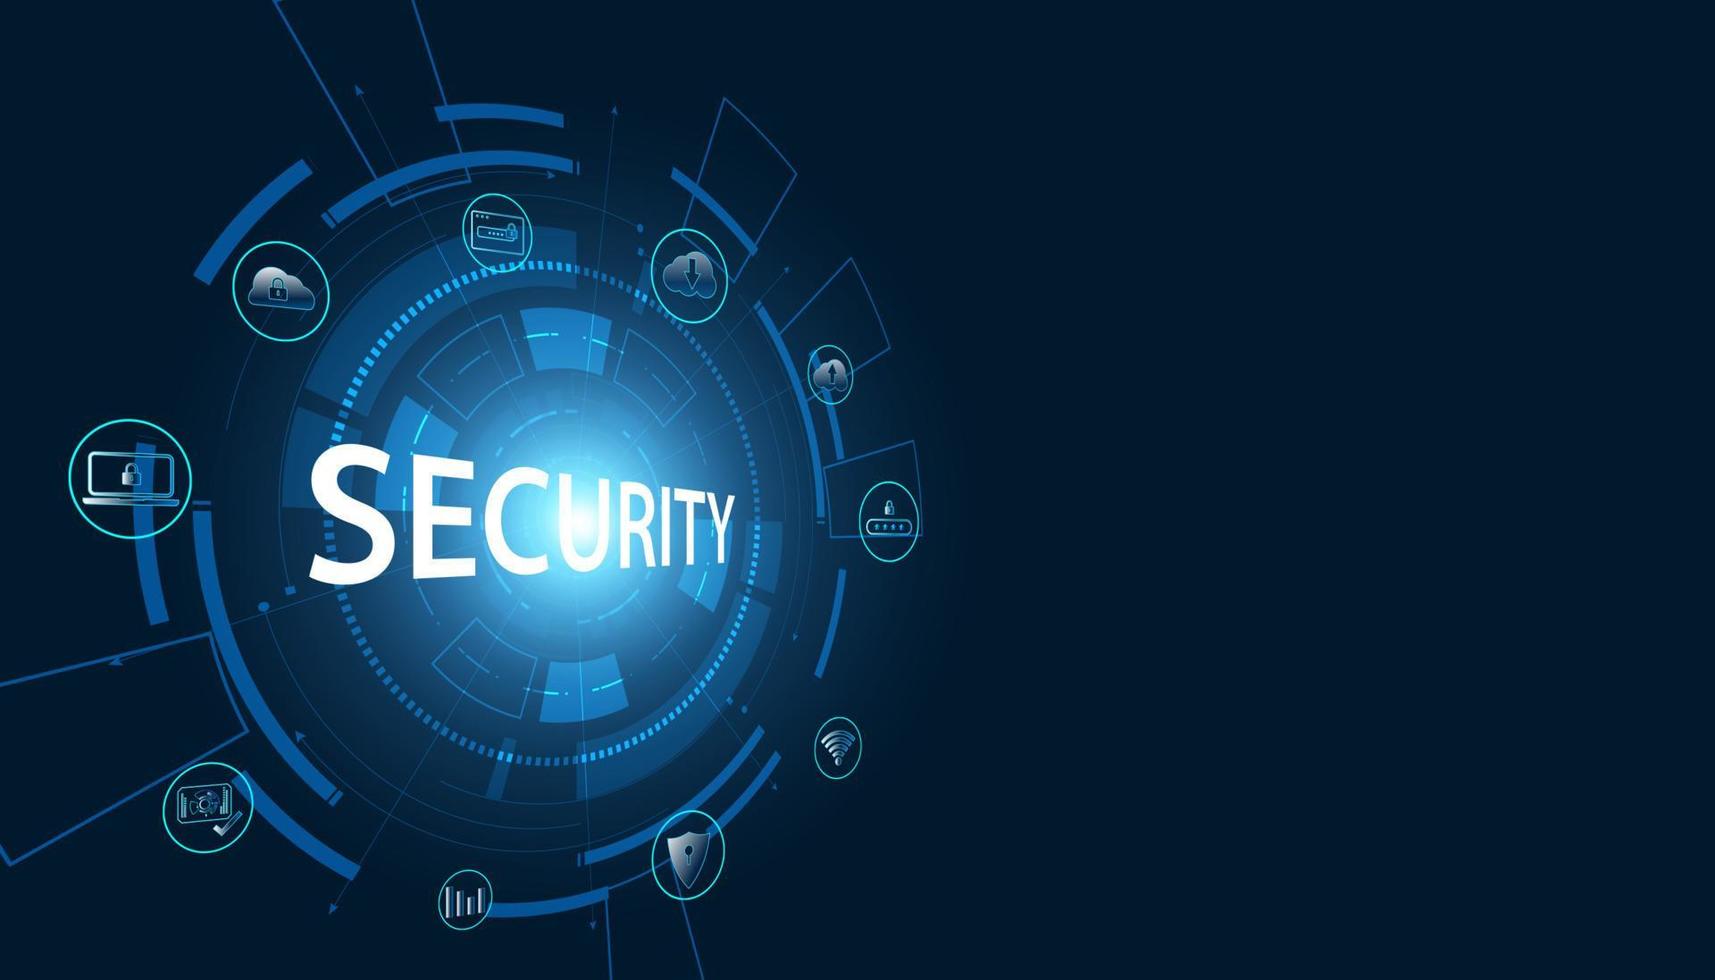 Abstract Cyber Security Concept Protect network, device, program and data from attacks, Network security, Application, Data security, Cloud. vector